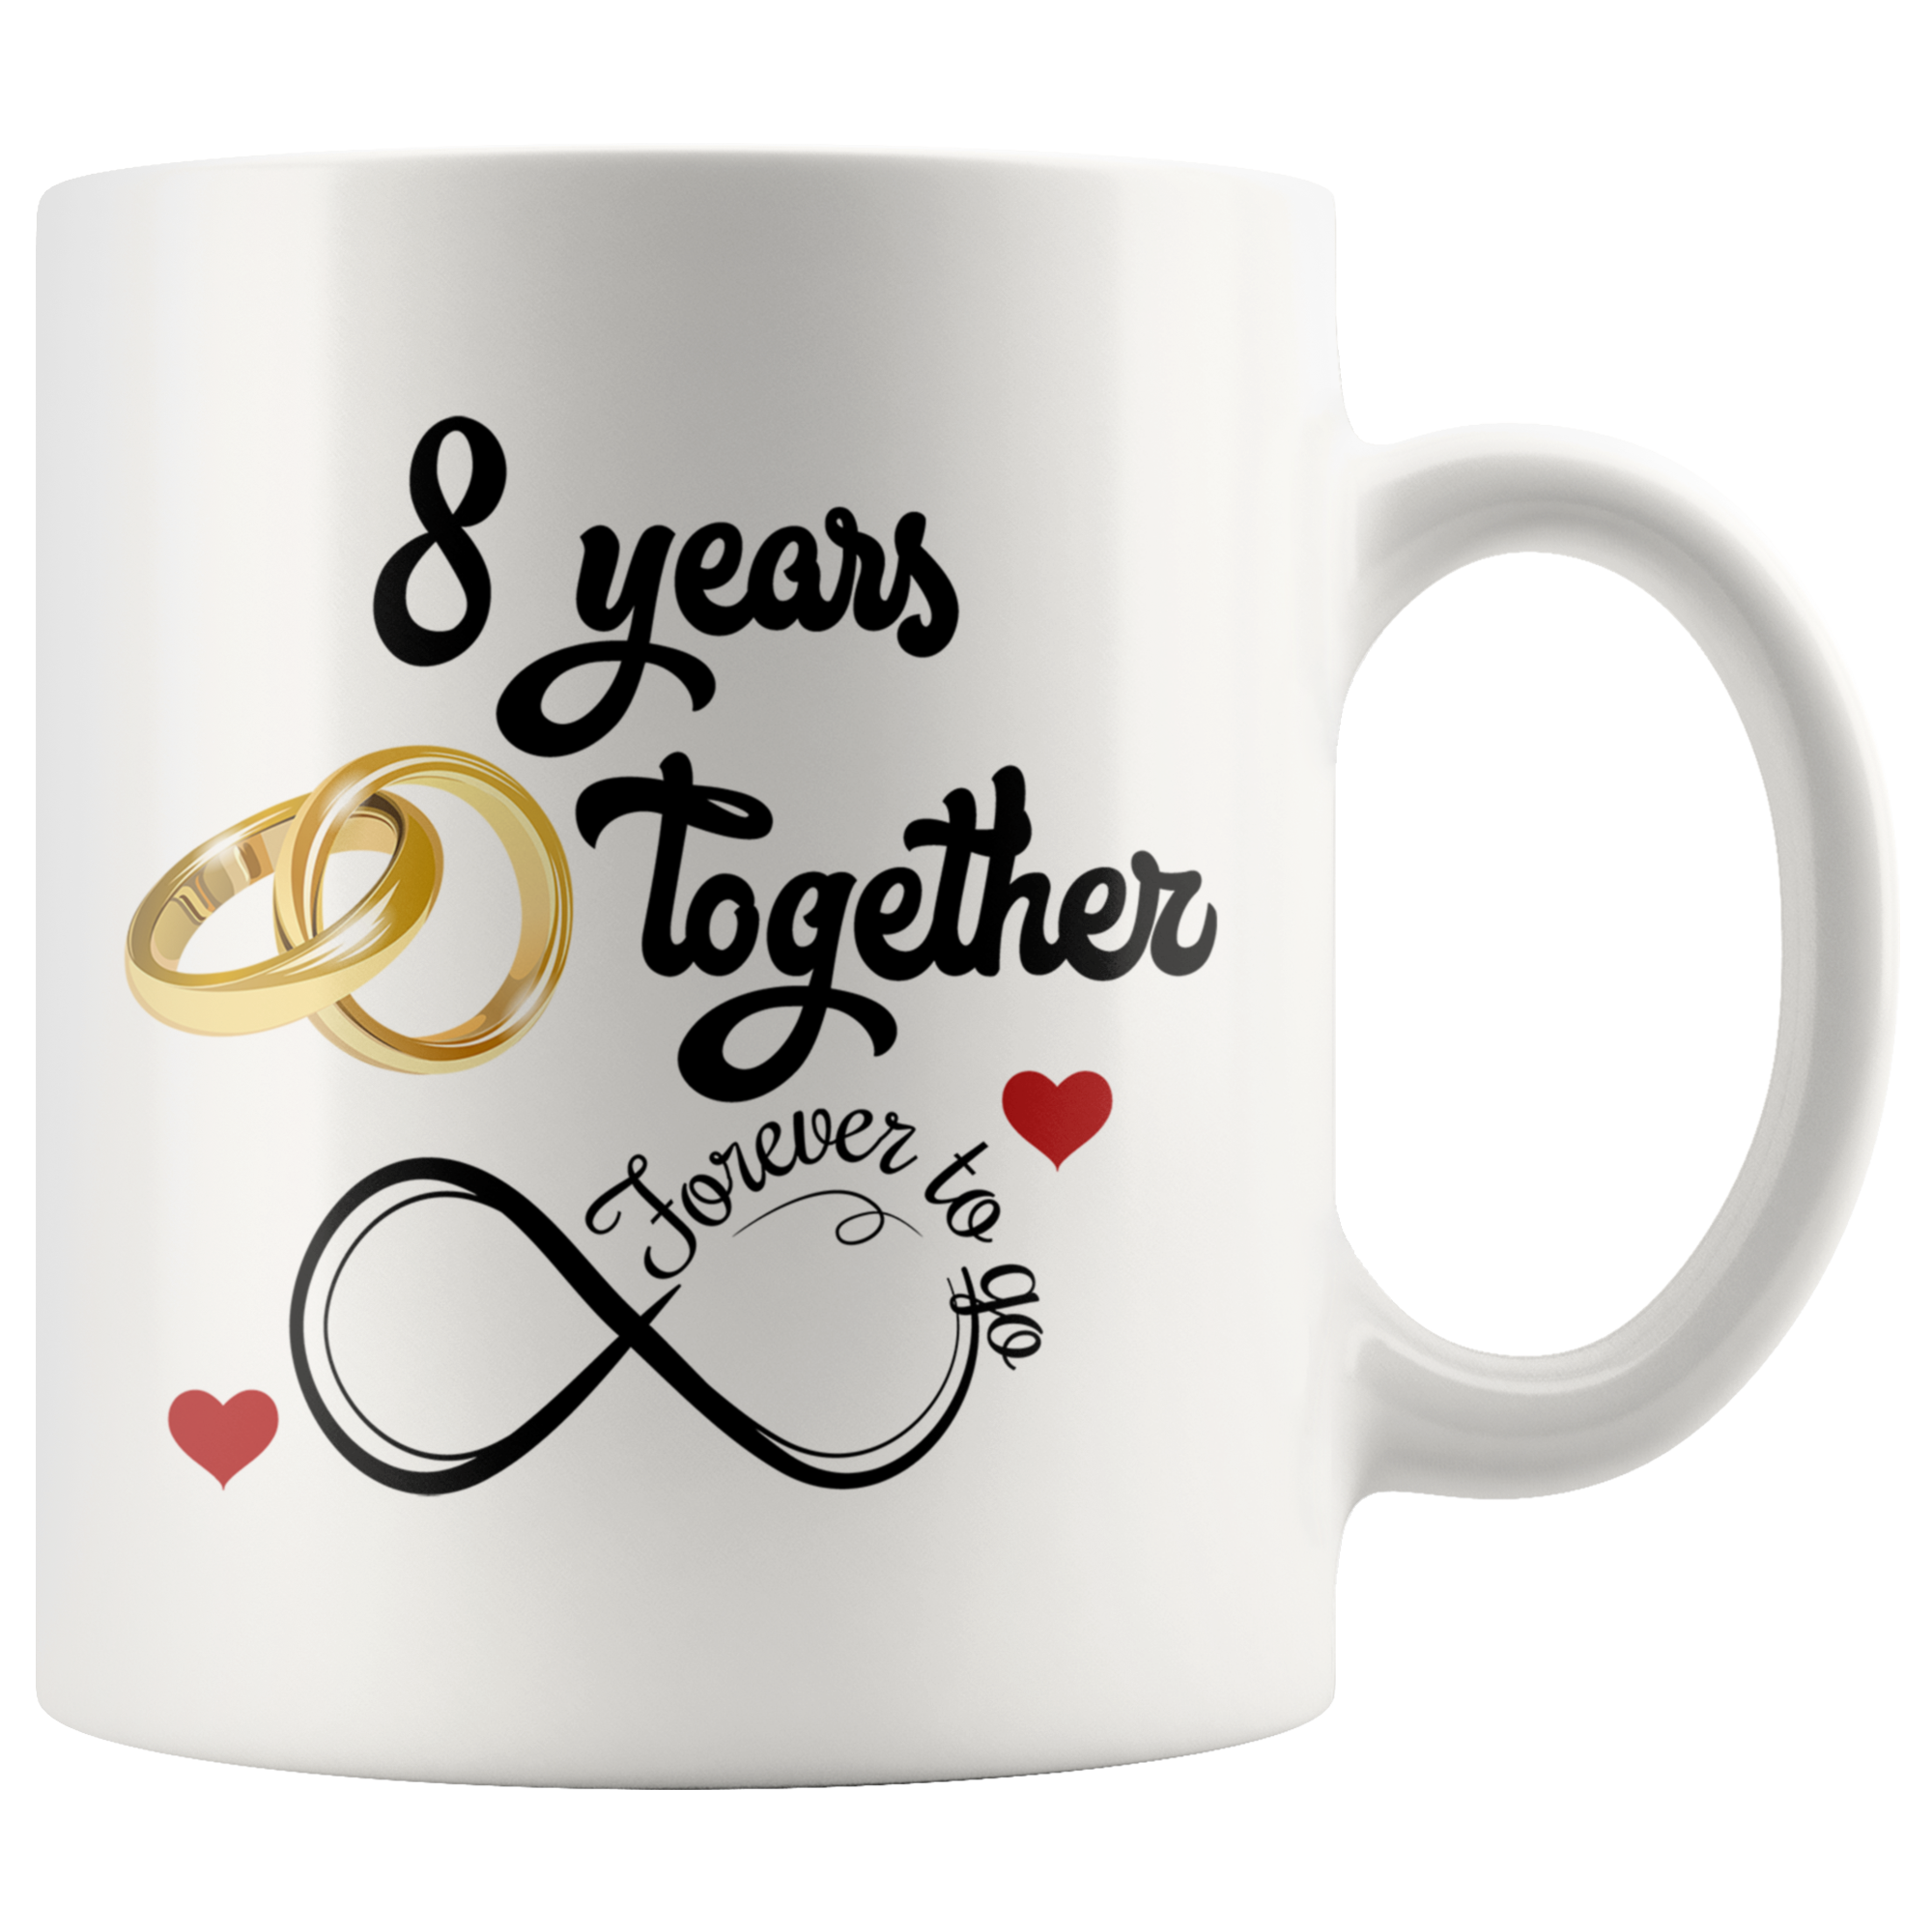 Top 8 Wedding Gift Ideas For Couples, Anniversary Return Gifts Ideas